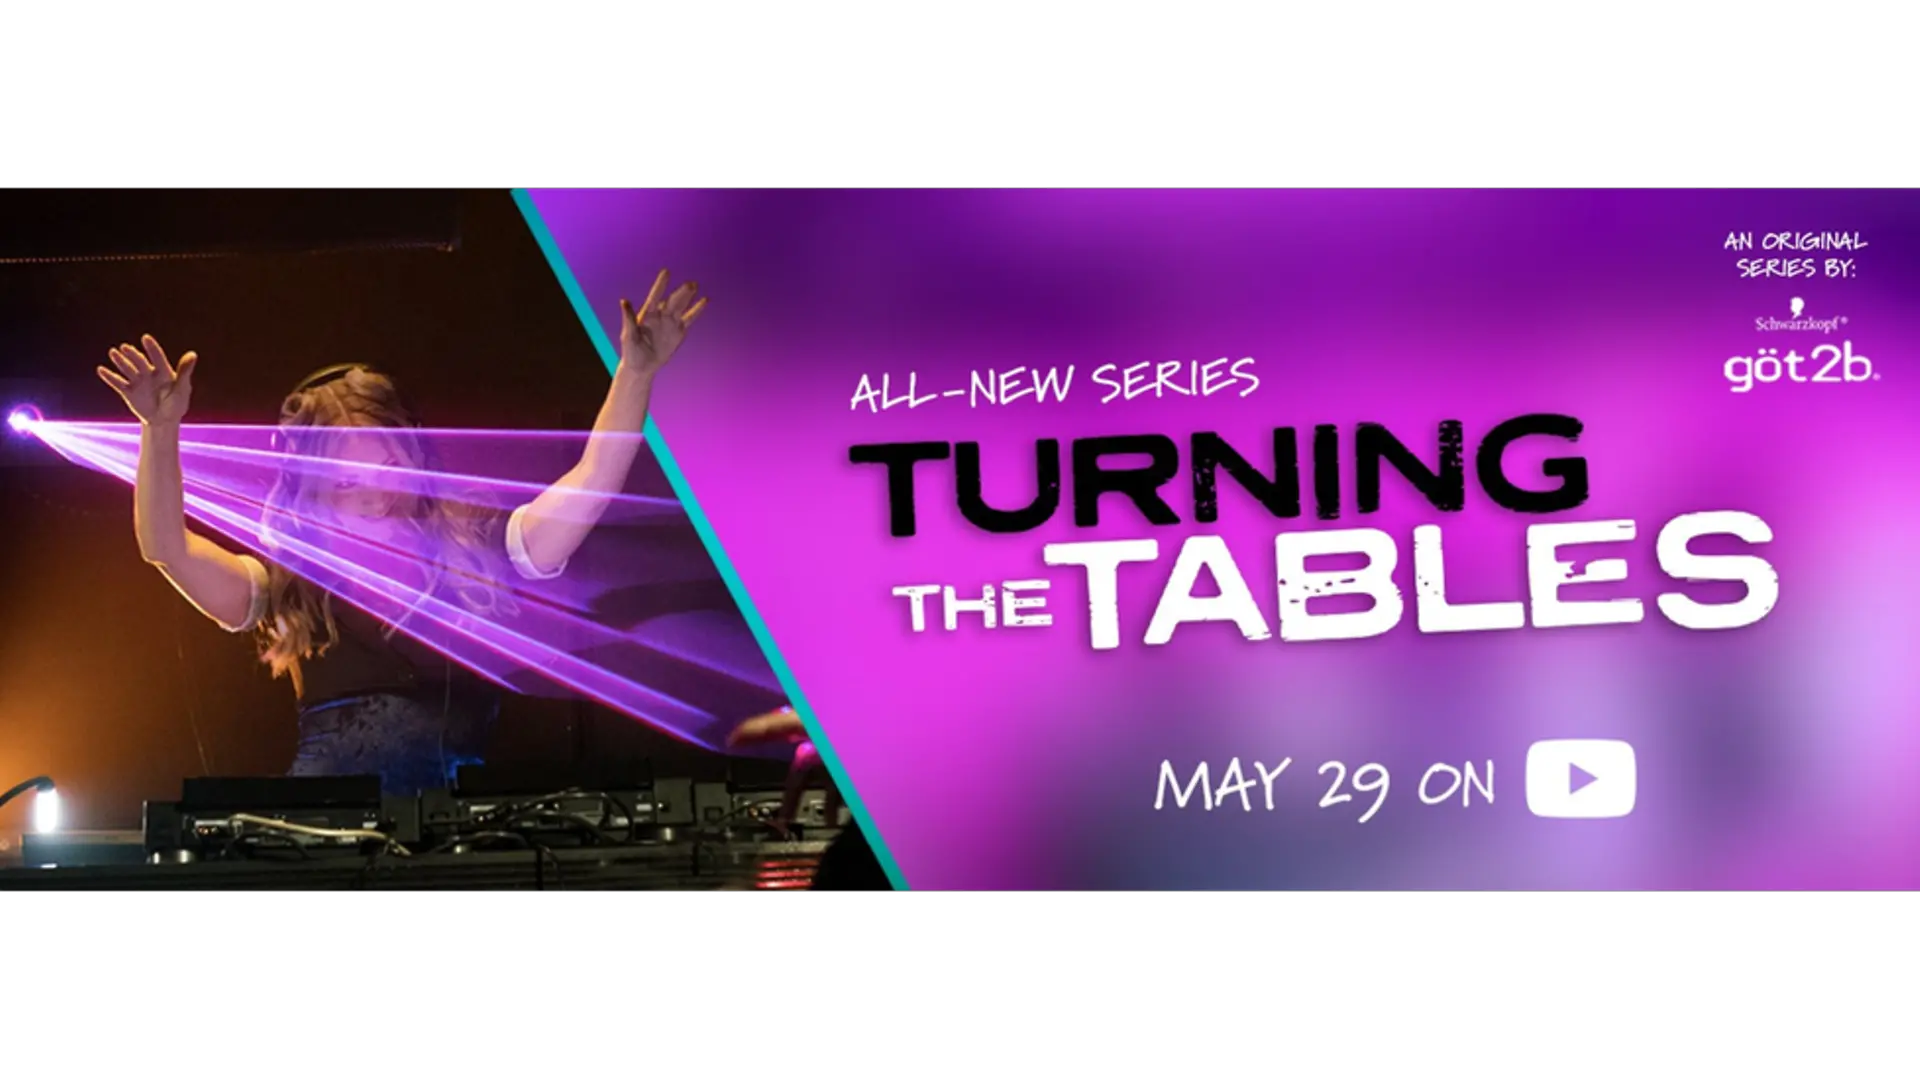 Henkel’s göt2b® trending-setting hair color and styling brand, has partnered with production company Shaftesbury to produce an original series Turning The Tables, now available on YouTube.